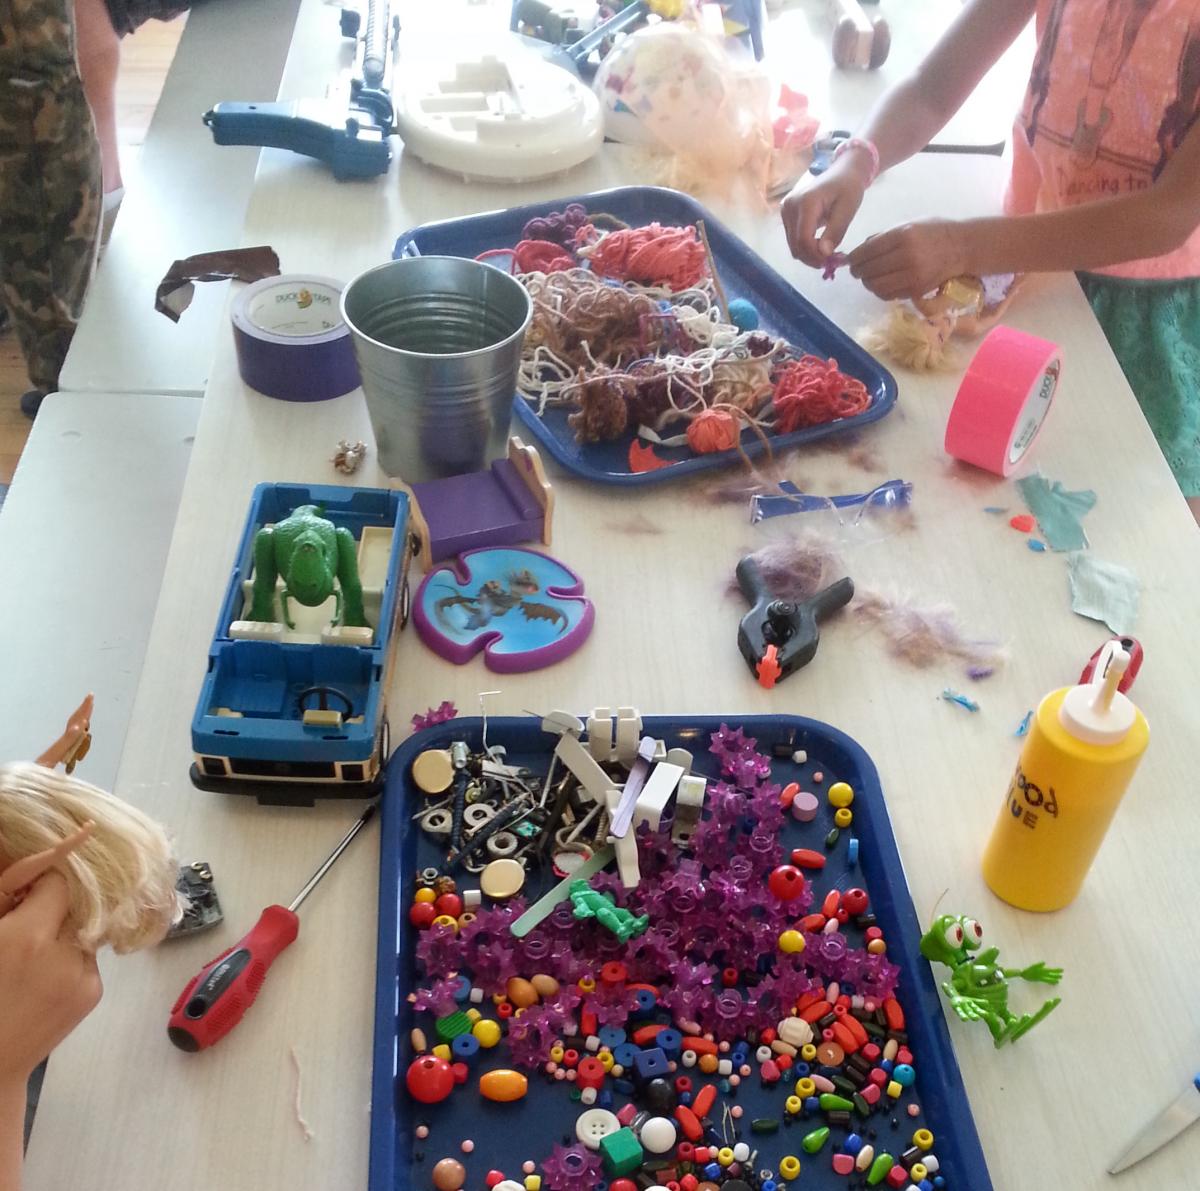 Kids making frankentoys from miscellaneous materials